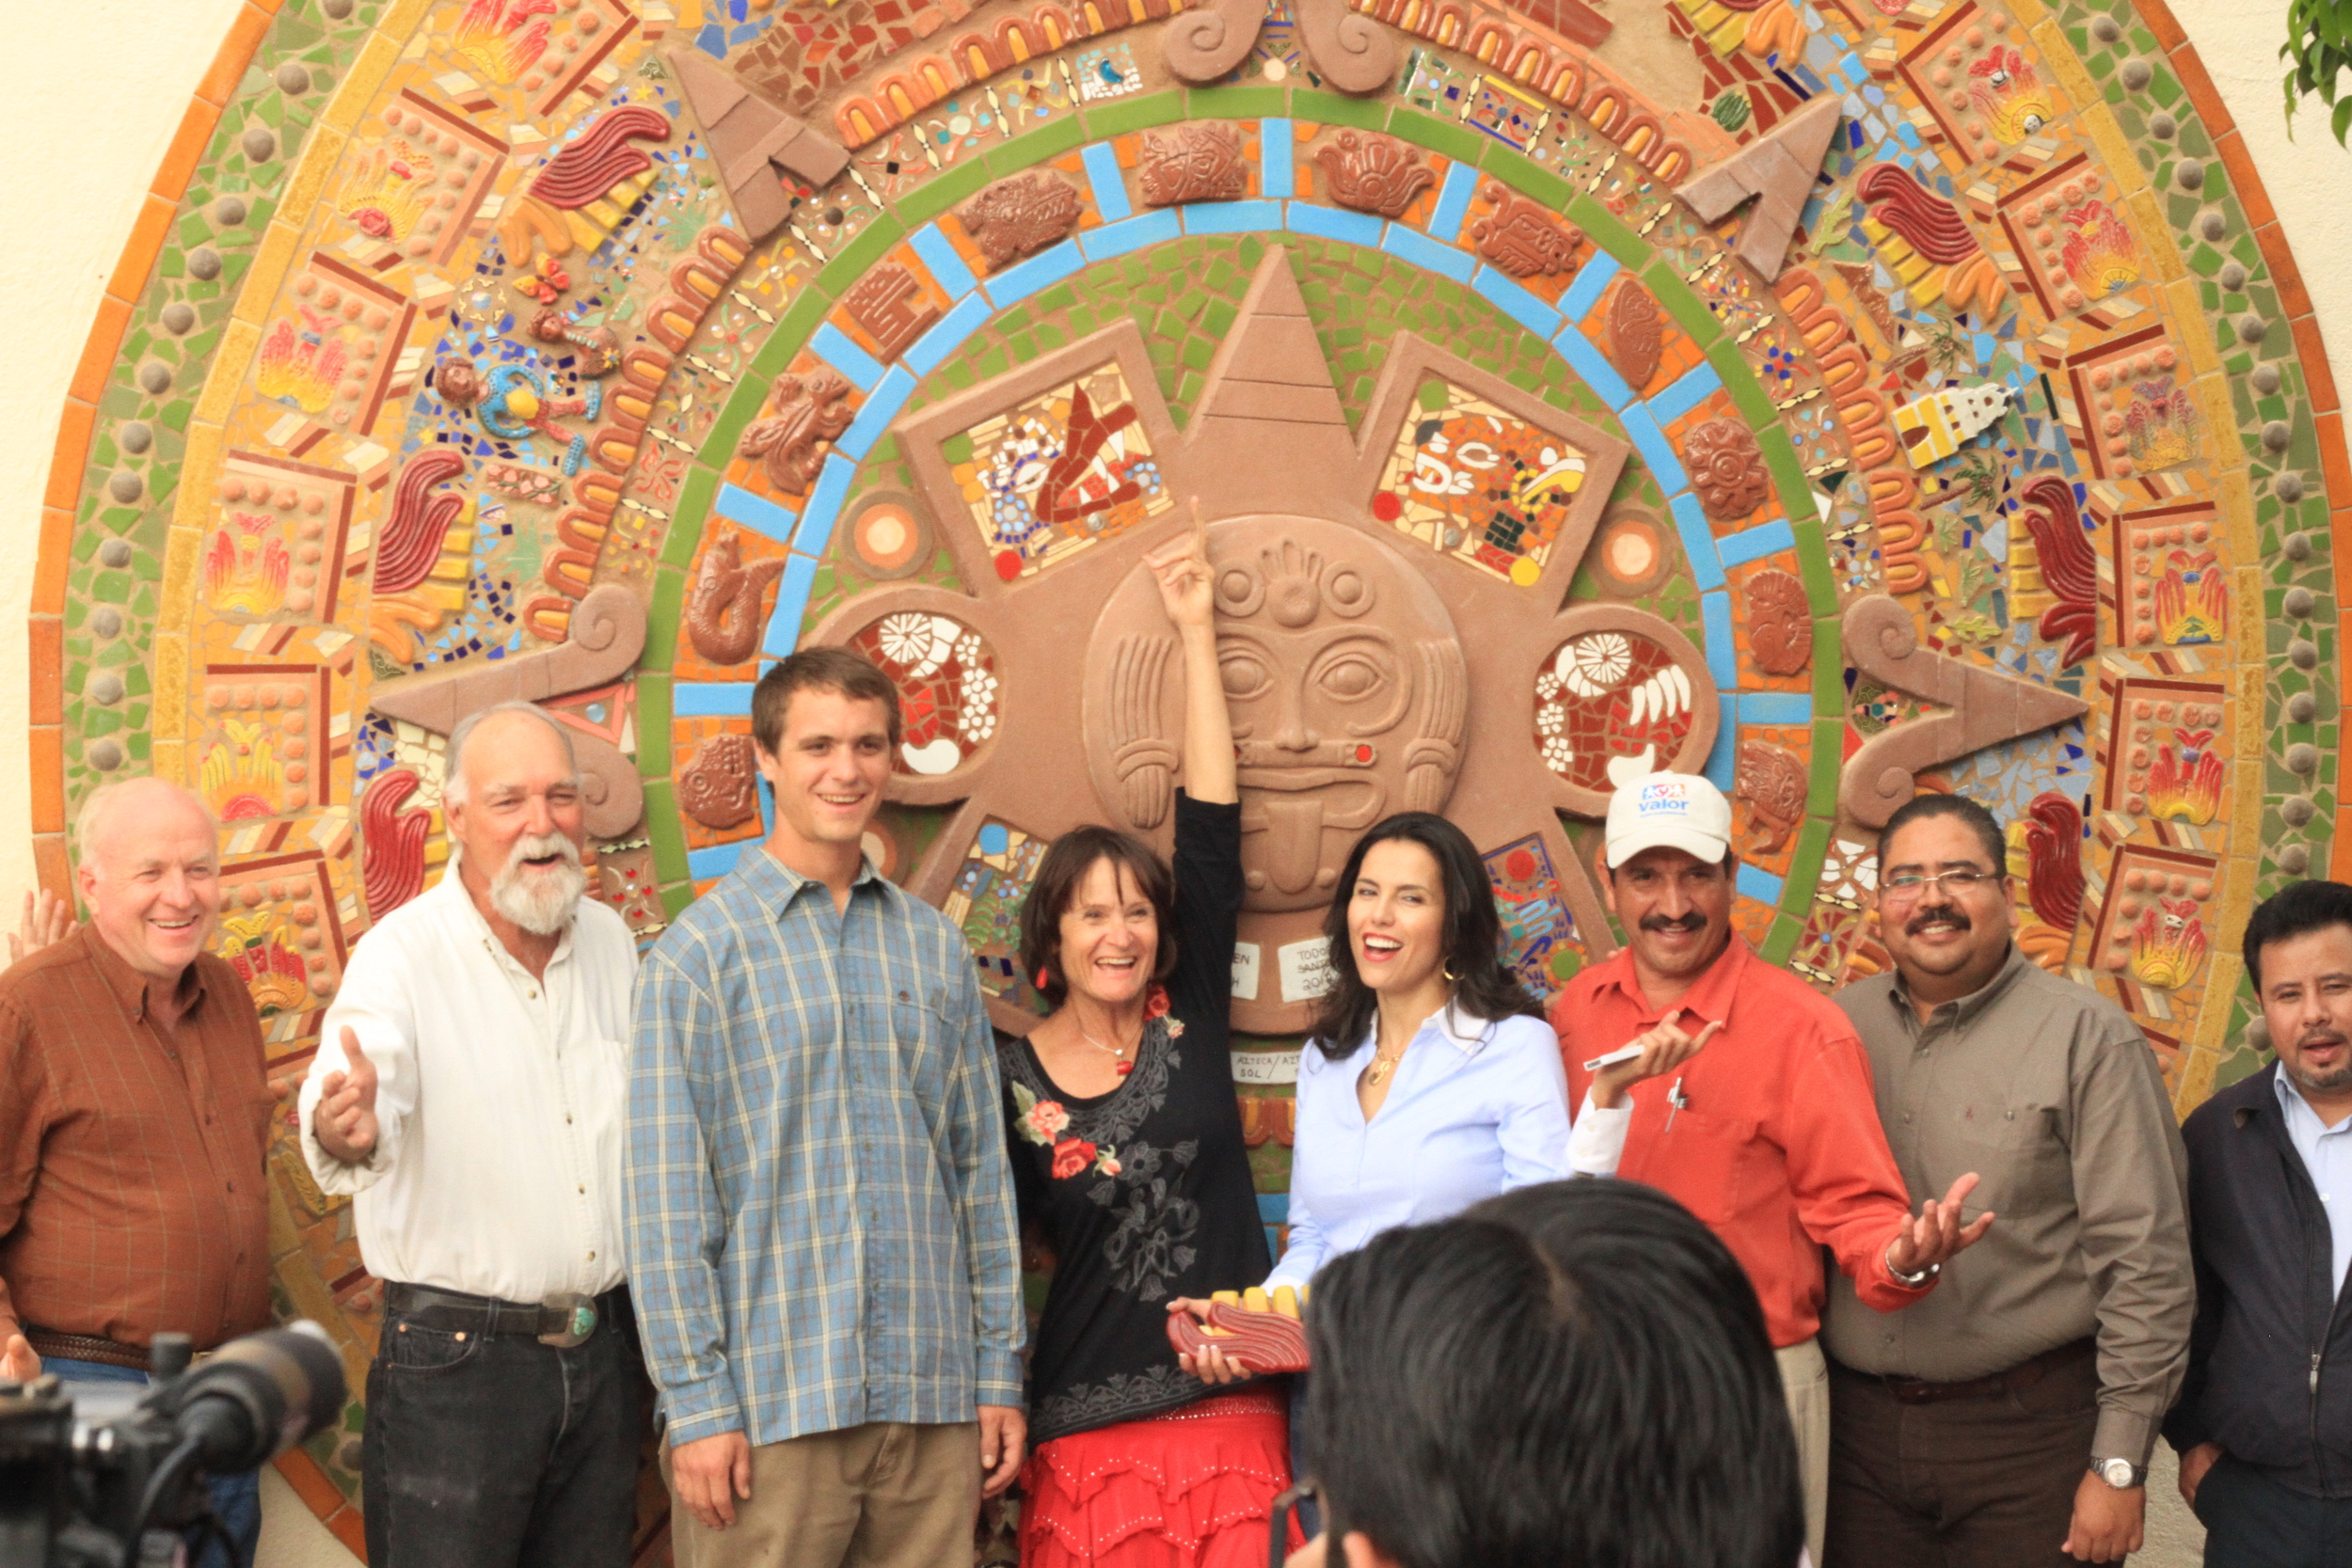  Aztec Calendar Mural Heaven on Earth Worksop and Community-Build 2012 Town Plaza, Todos Santos, B.C.S., Mexico 